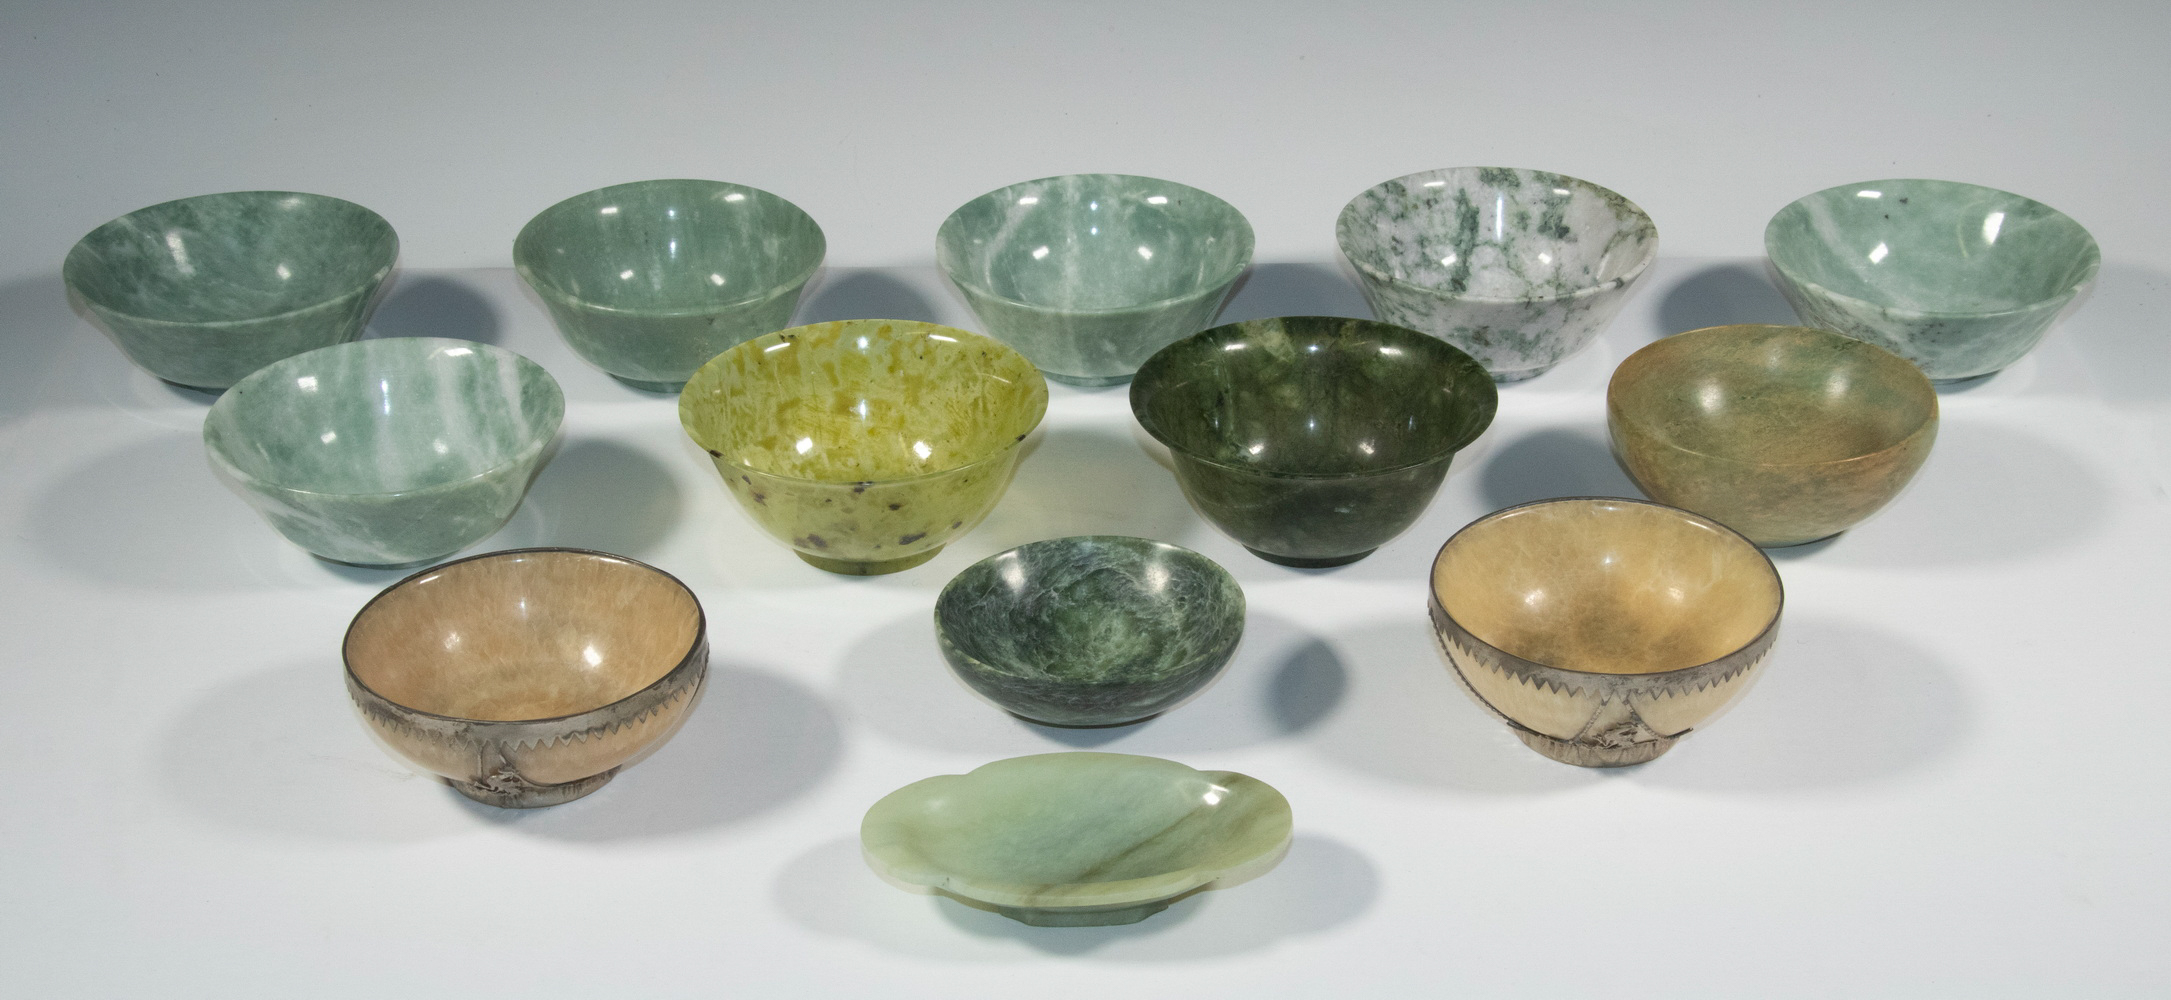 COLLECTION OF CARVED STONE BOWLS 302899